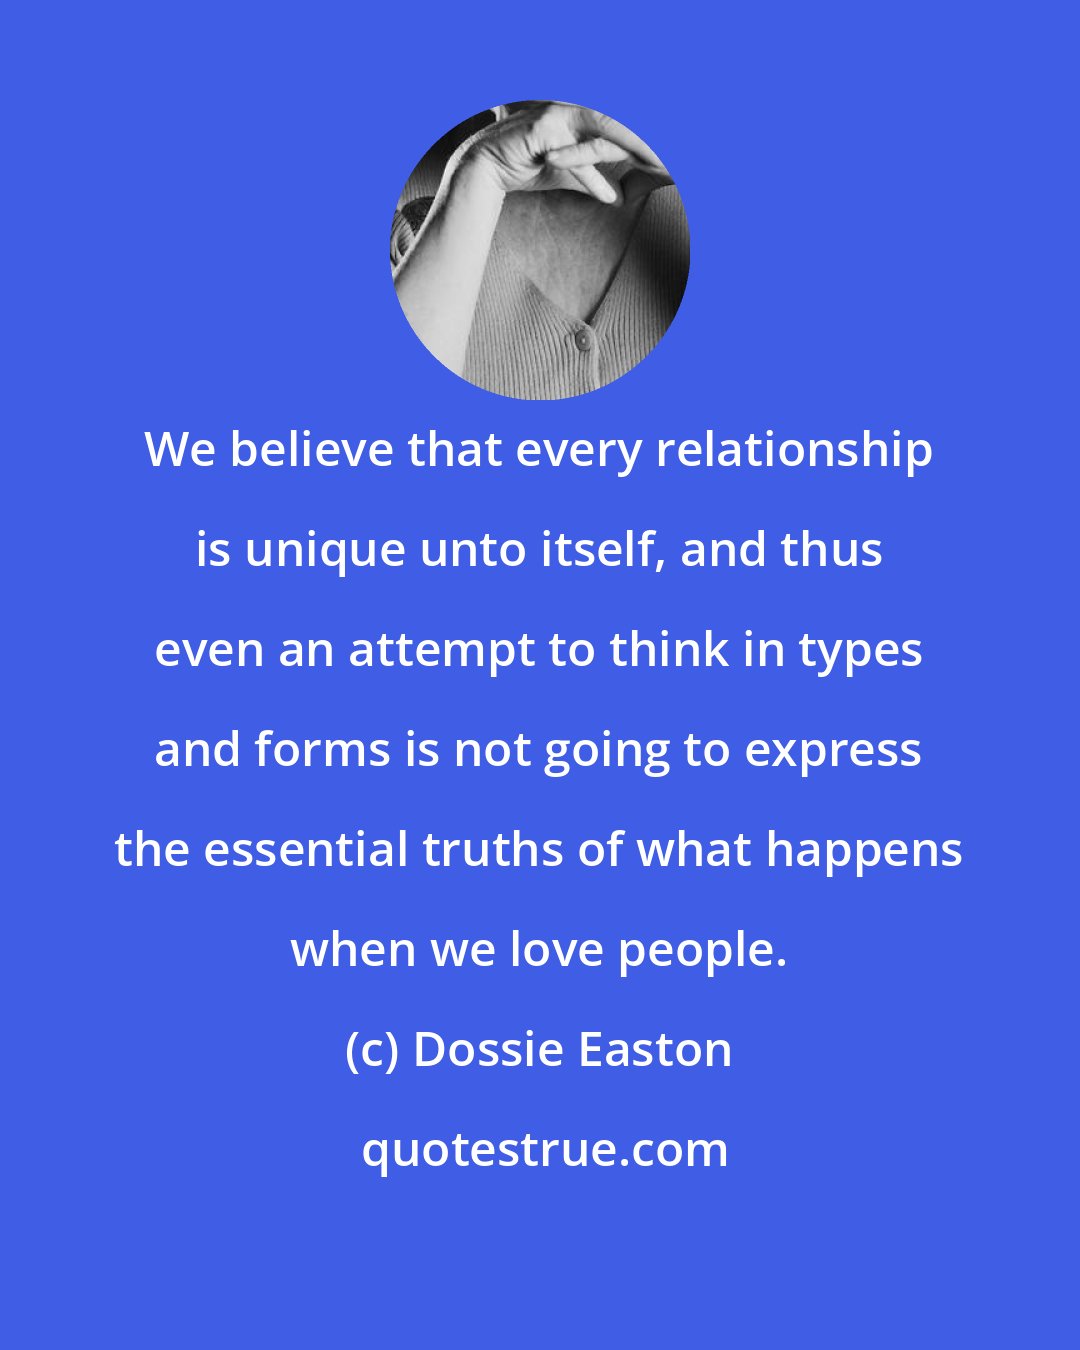 Dossie Easton: We believe that every relationship is unique unto itself, and thus even an attempt to think in types and forms is not going to express the essential truths of what happens when we love people.